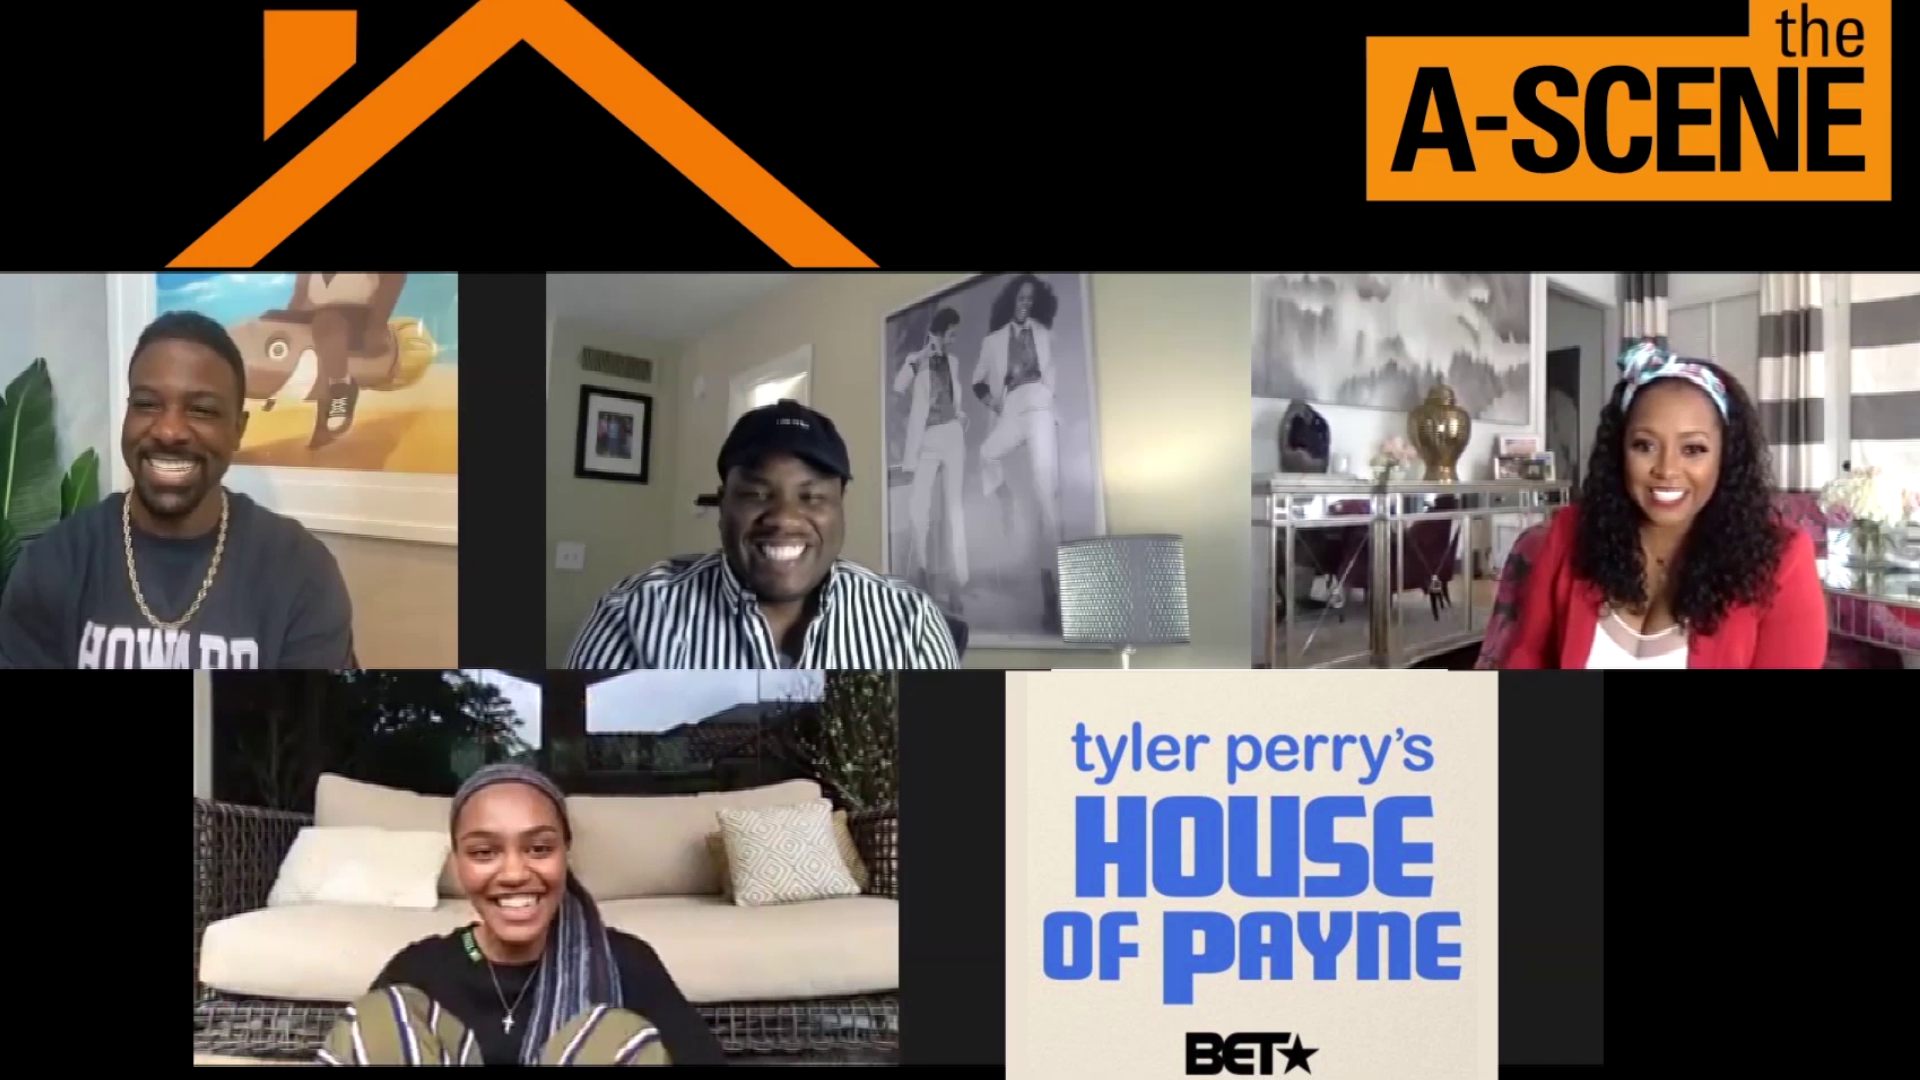 Actors Lance Gross, Keisha Knight-Pulliam, and China McClain sat down with The A-Scene’s Ryan J. Dennis to talk about how Tyler Perry’s House of Payne was picked up